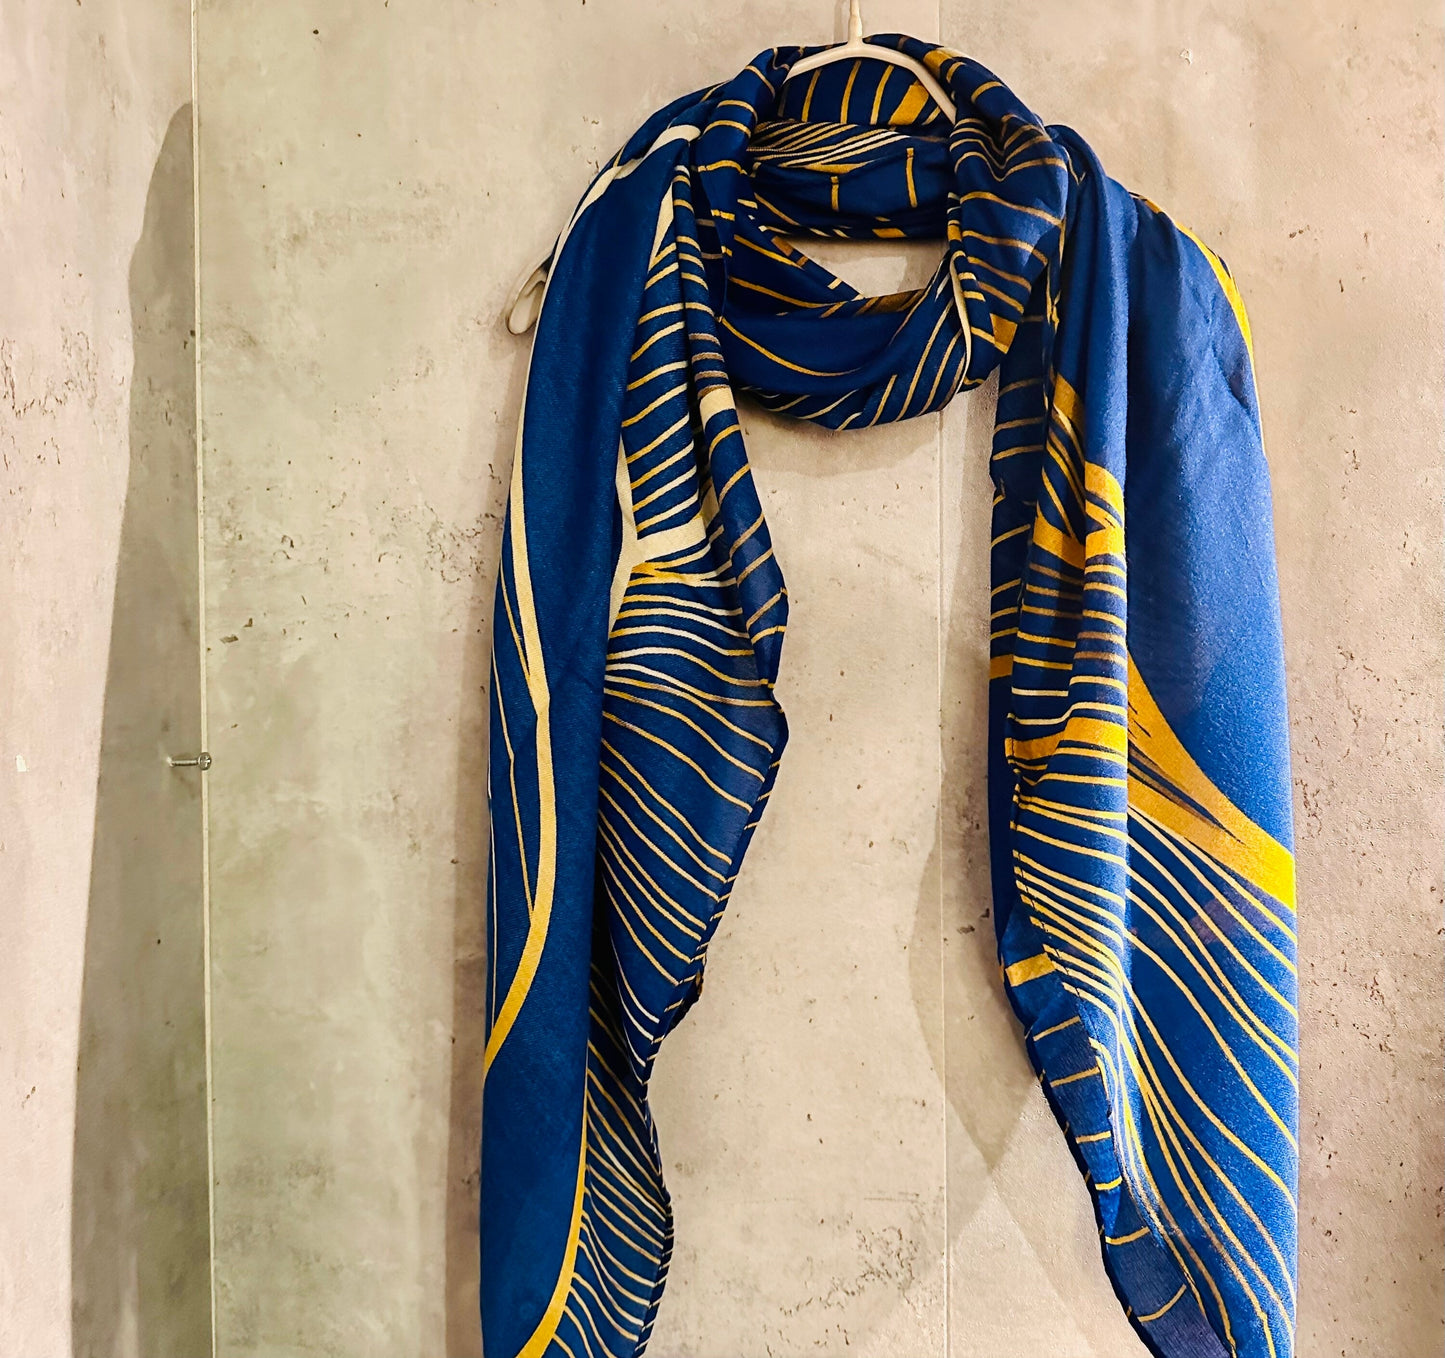 Blue Organic Cotton Scarf with Leaf Vein Pattern – An Eco-Friendly Gift for Mom, Perfect for Birthday and Christmas, from a UK Seller